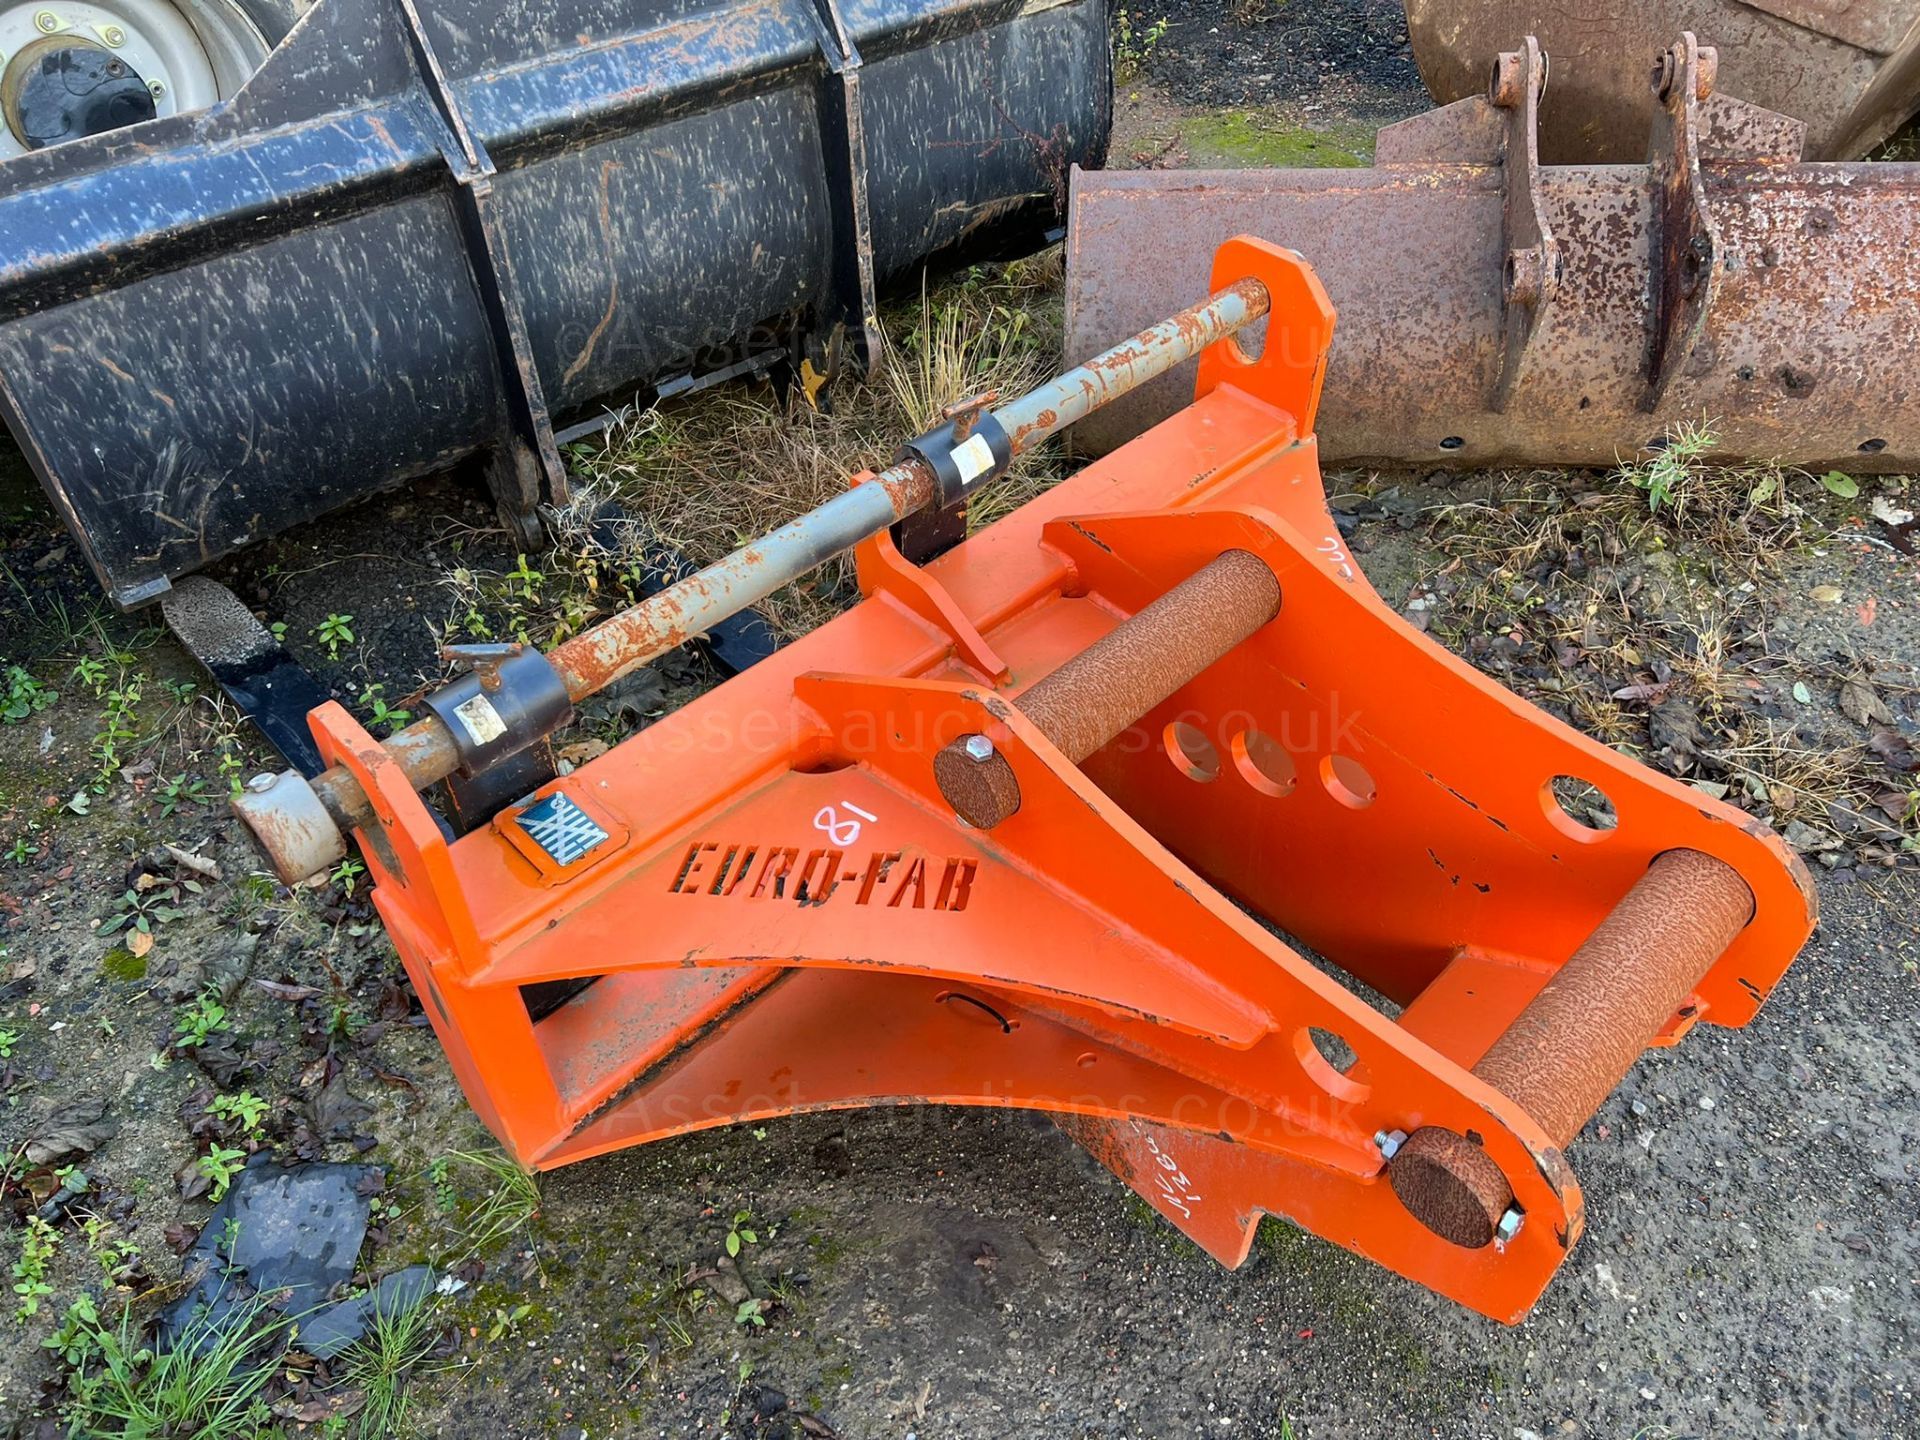 NEW AND UNUSED EURO FAB PALLET FORKS, SUITABLE FOR 13-20 TON EXCAVATOR, FORKS ARE INCLUDED *PLUS VAT - Image 2 of 4